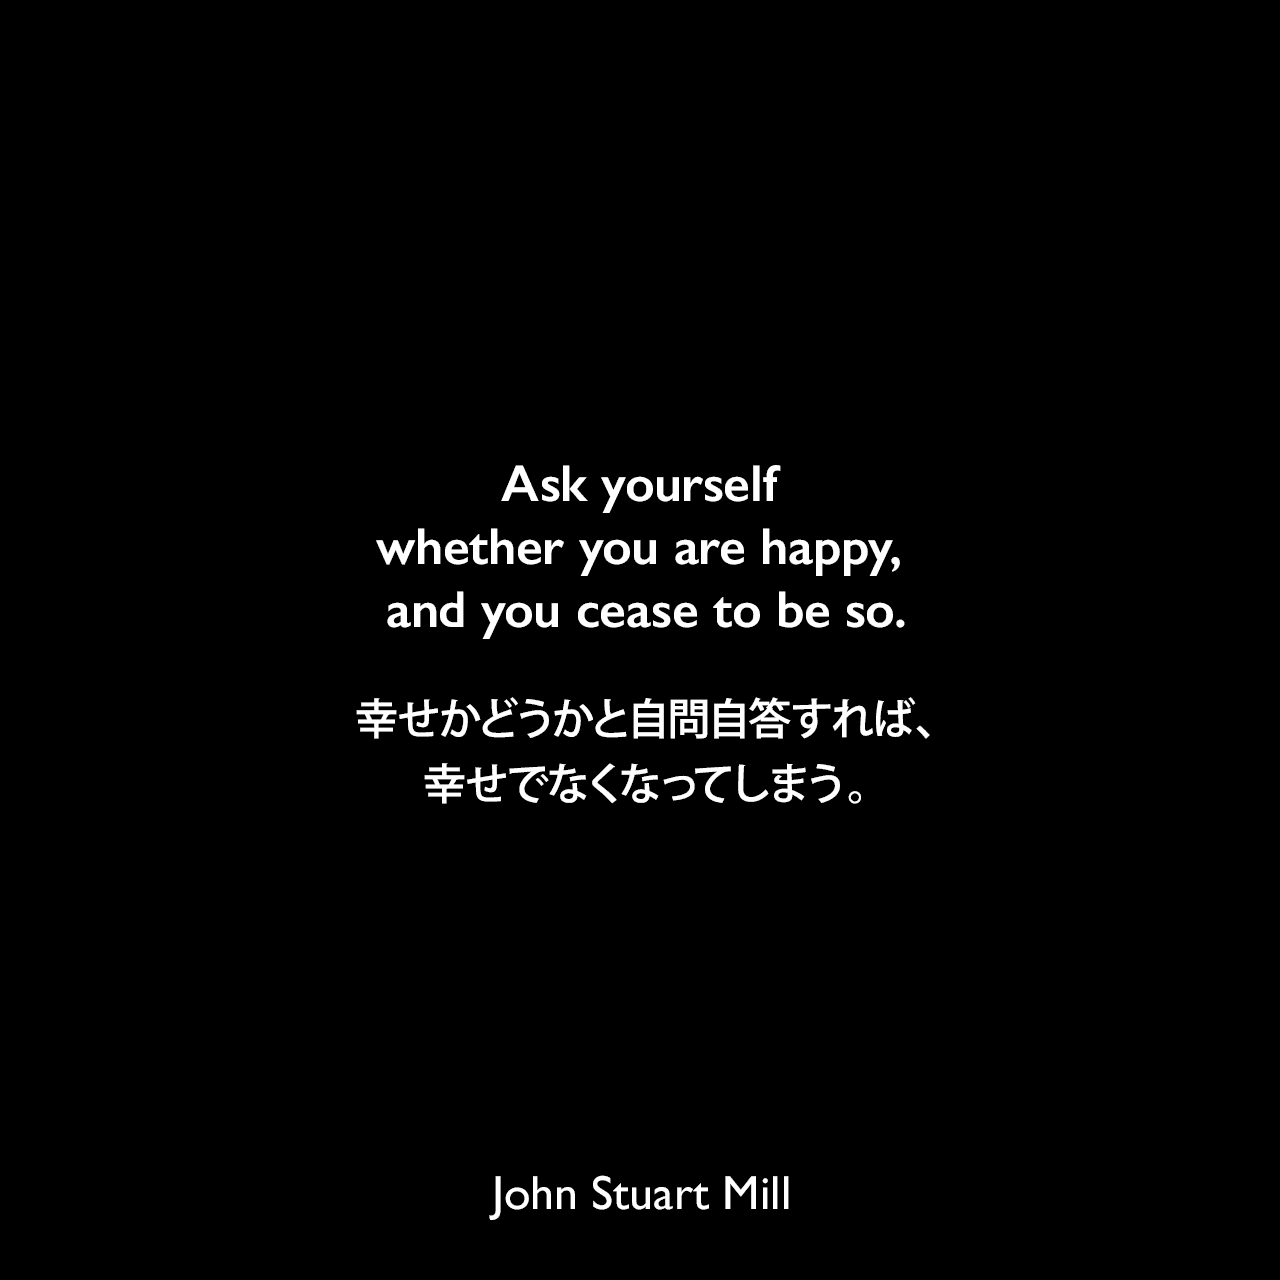 Ask yourself whether you are happy, and you cease to be so.幸せかどうかと自問自答すれば、幸せでなくなってしまう。- ジョン・スチュアート・ミルの自伝よりJohn Stuart Mill